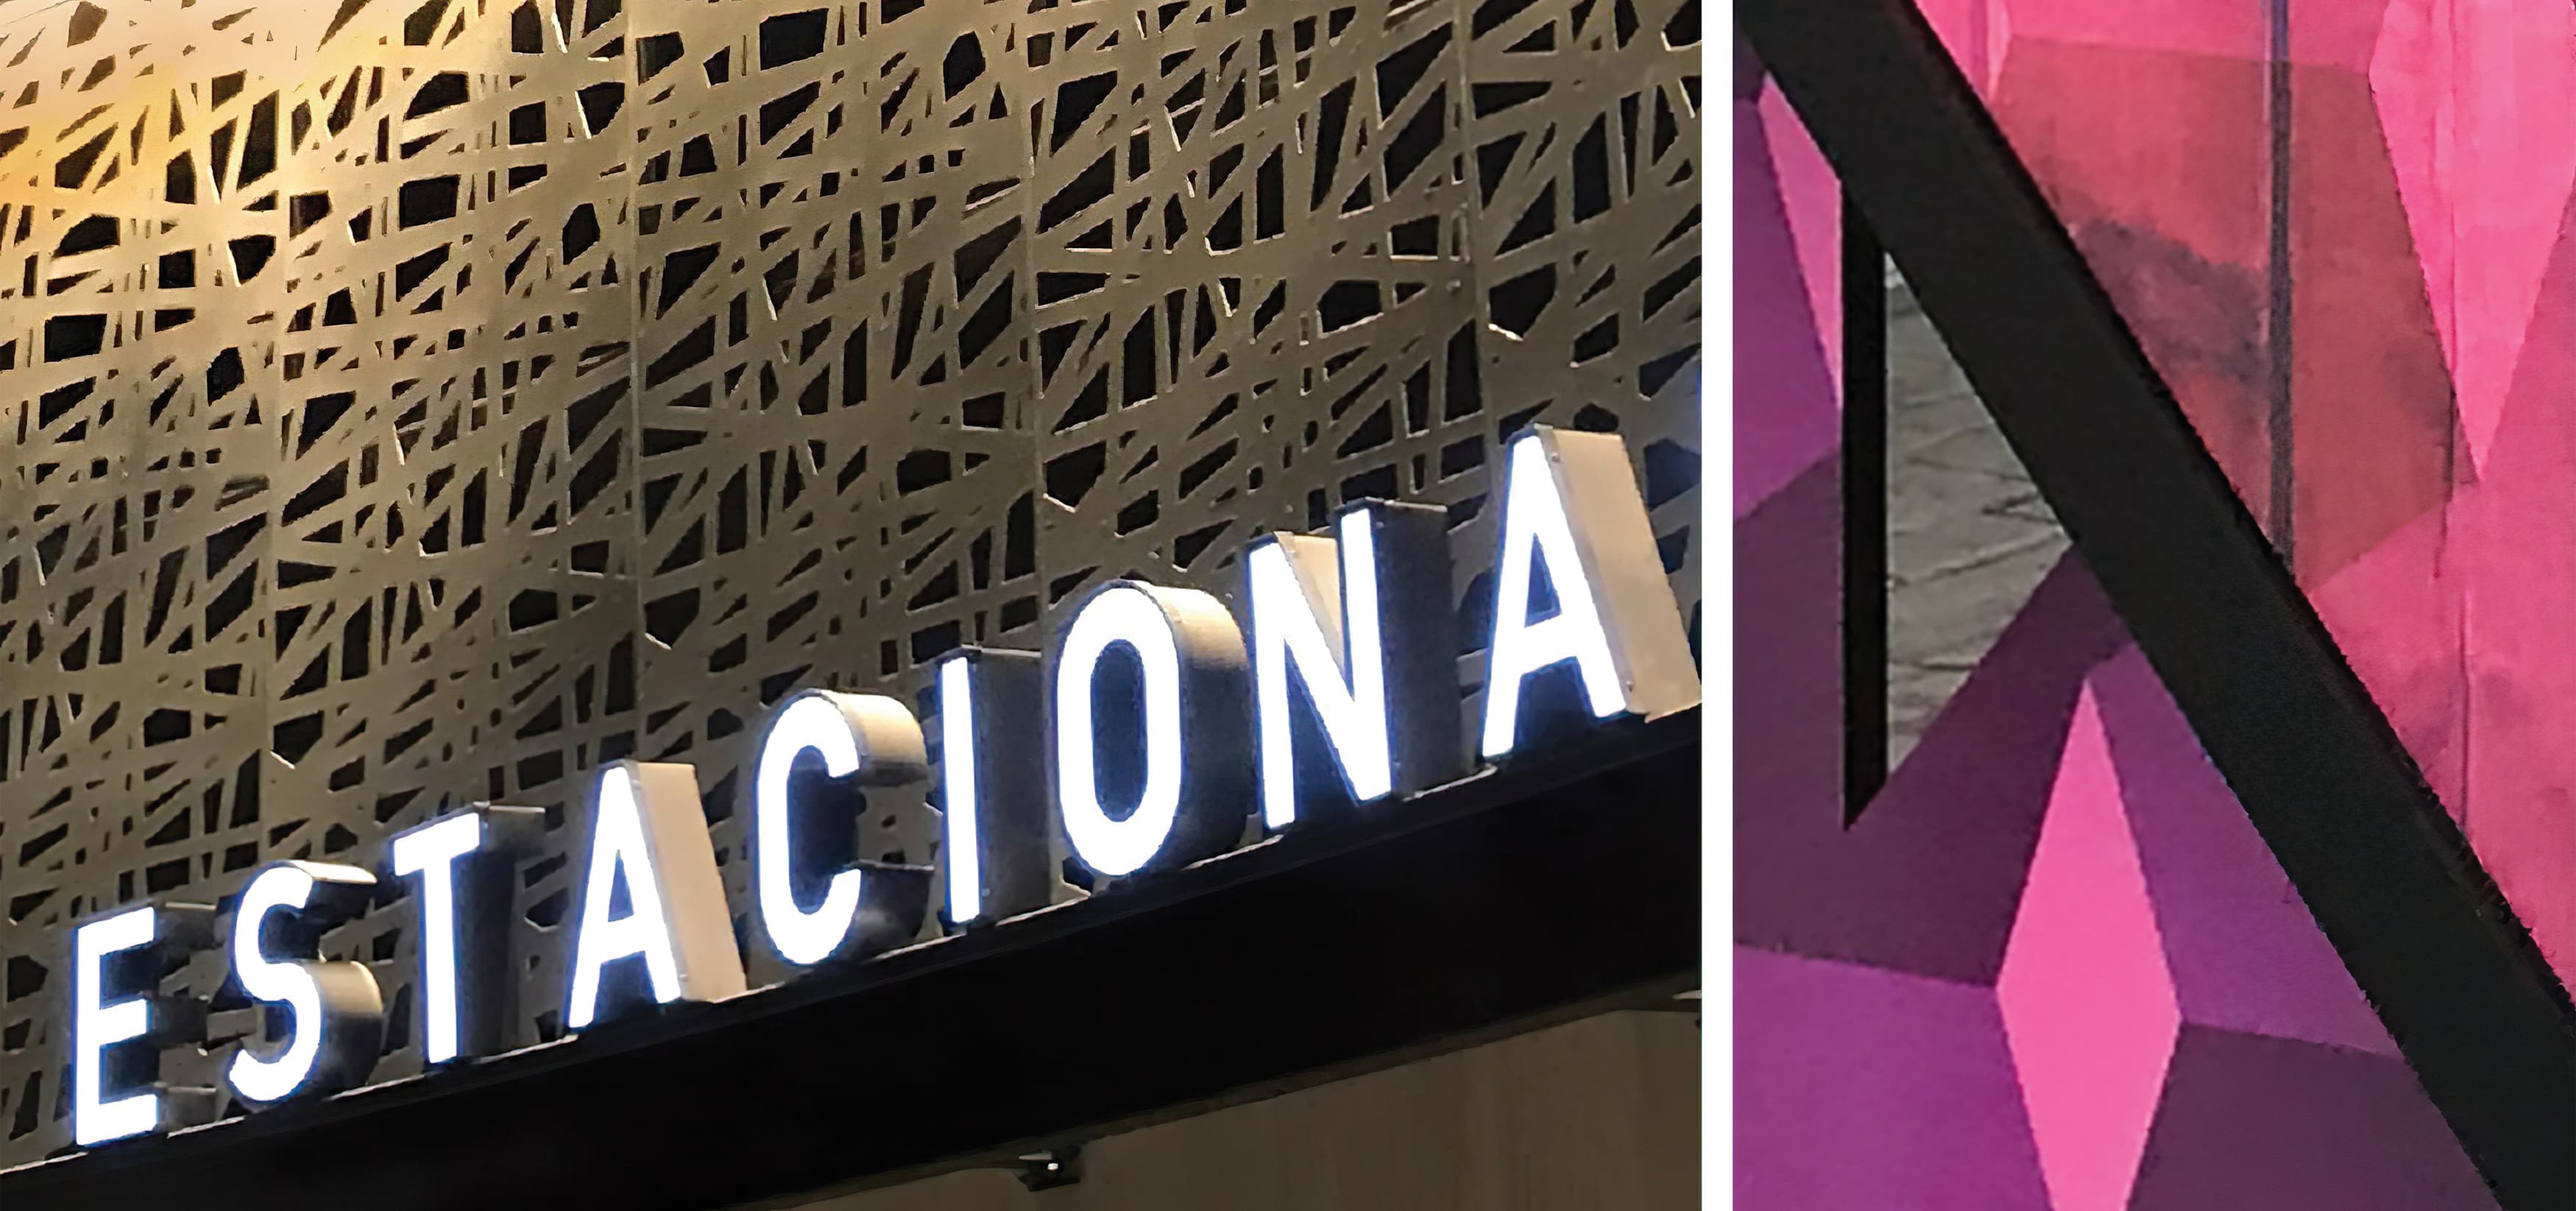 Forum Cuernavaca, a retail and mixed-use project in Cuernavaca, Mexico, parking identity signage